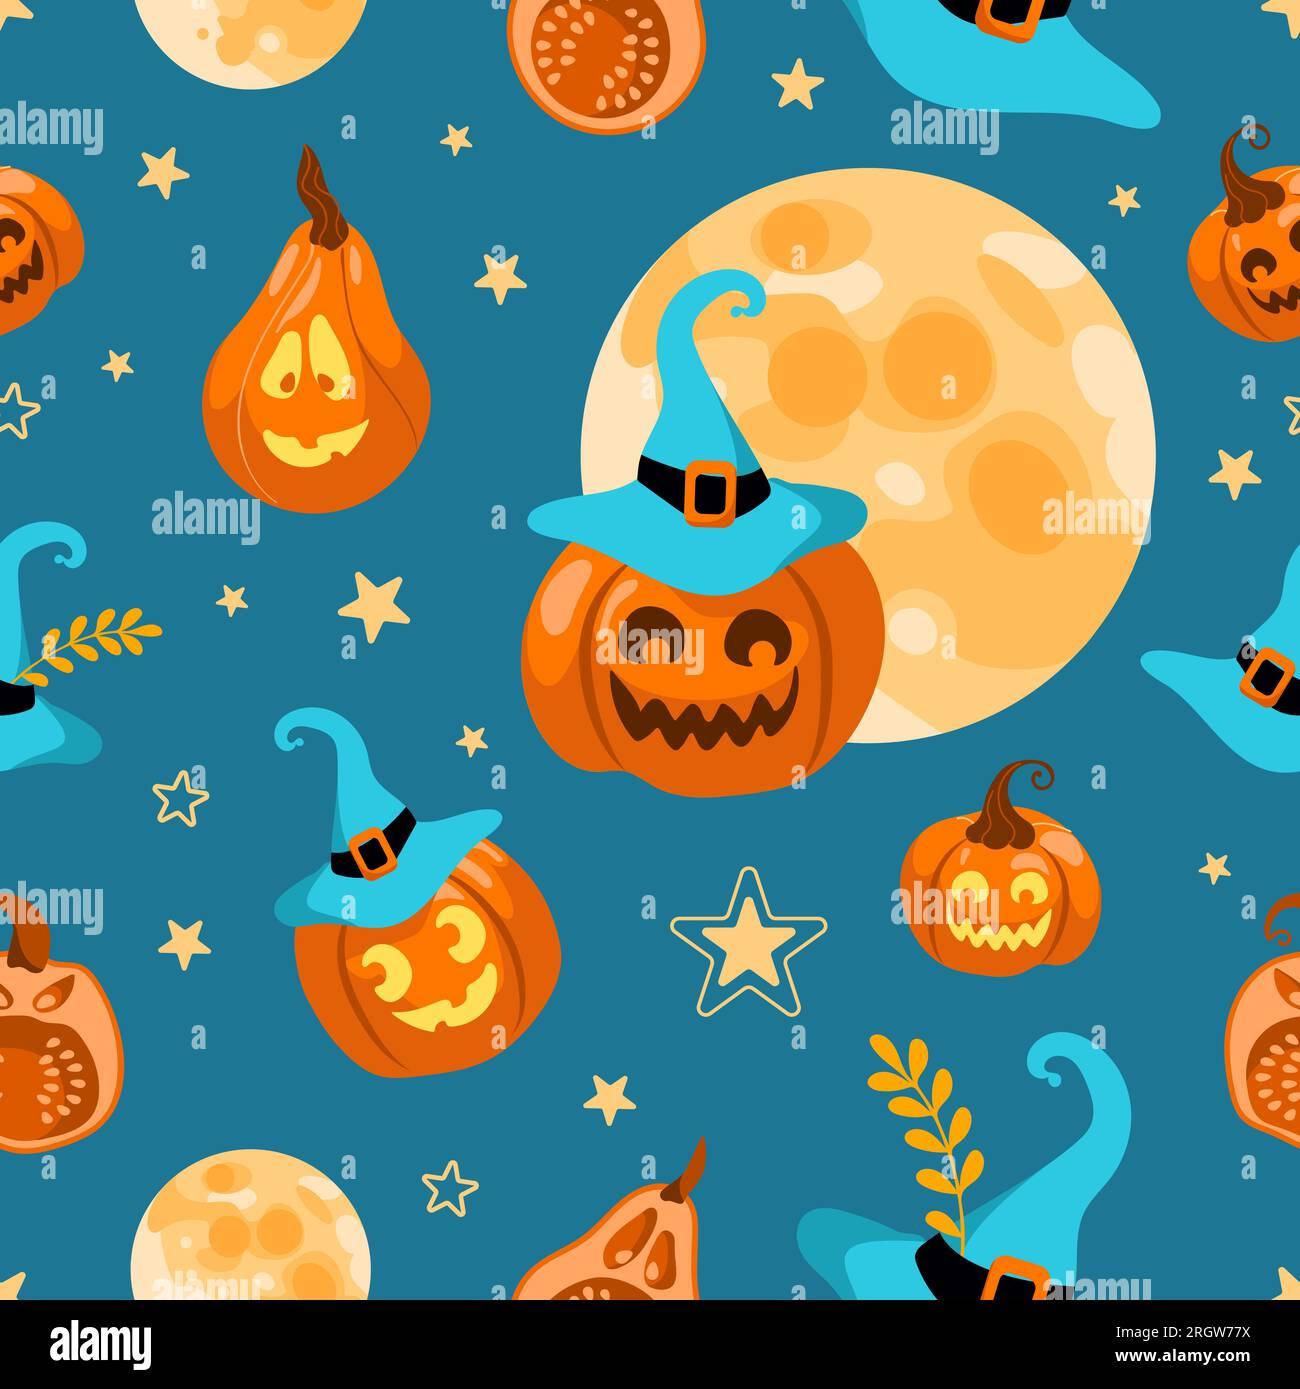 Halloween seamless pattern moon witch hat jack lantern star and